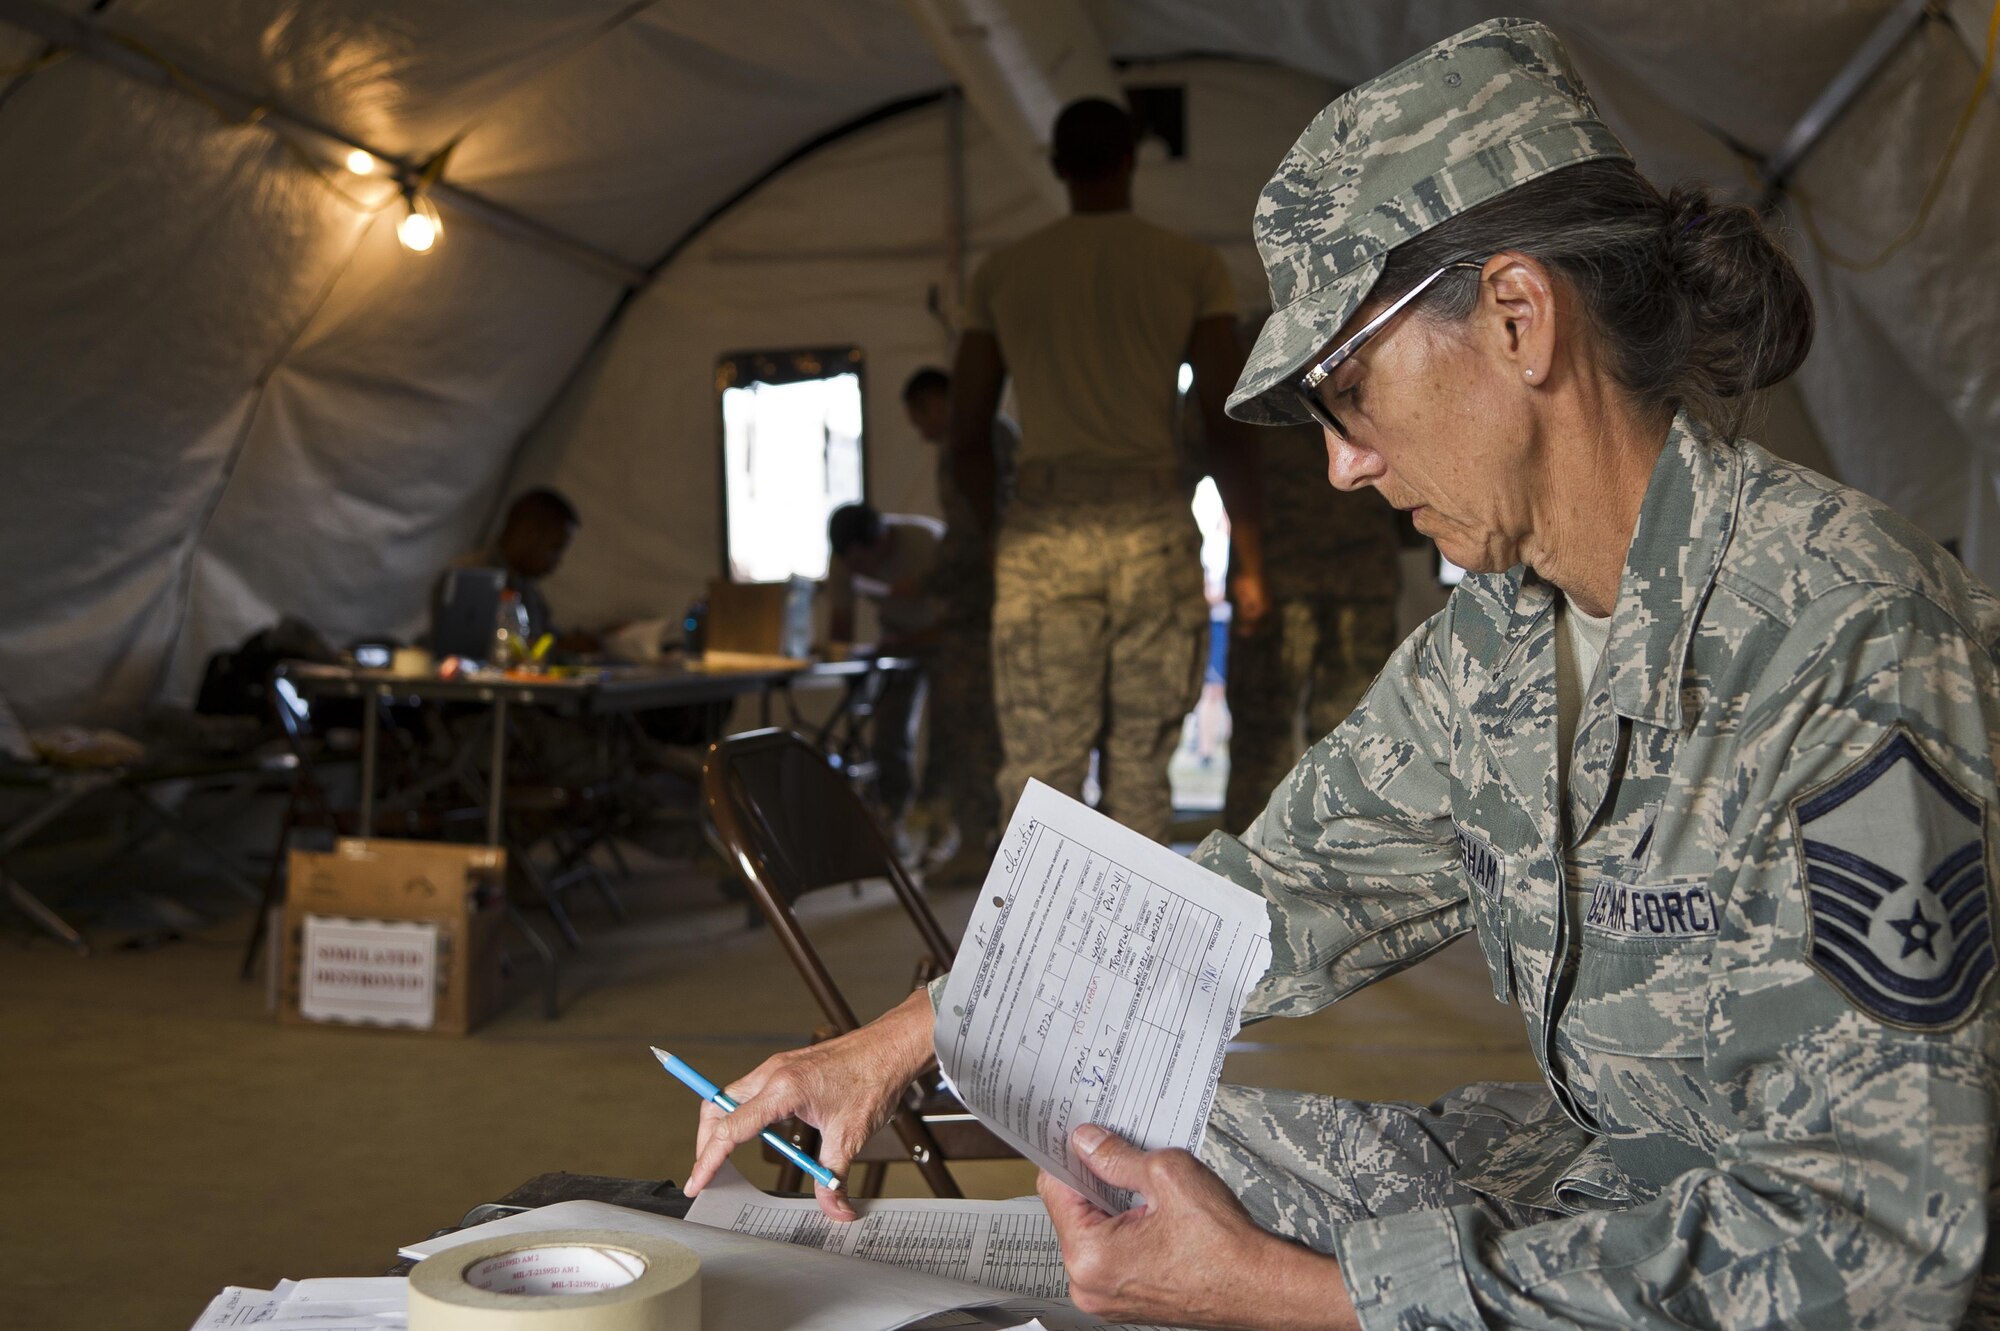 U.S. Air Force for Master Sgt. Mary Buckingham, 302nd Support Squadron, Peterson AFB, Colo., out-processes airmen through Personnel Support at Young Air Assault Strip, Fort McCoy, Wis., Aug. 22, 2017 during exercise Patriot Warrior.